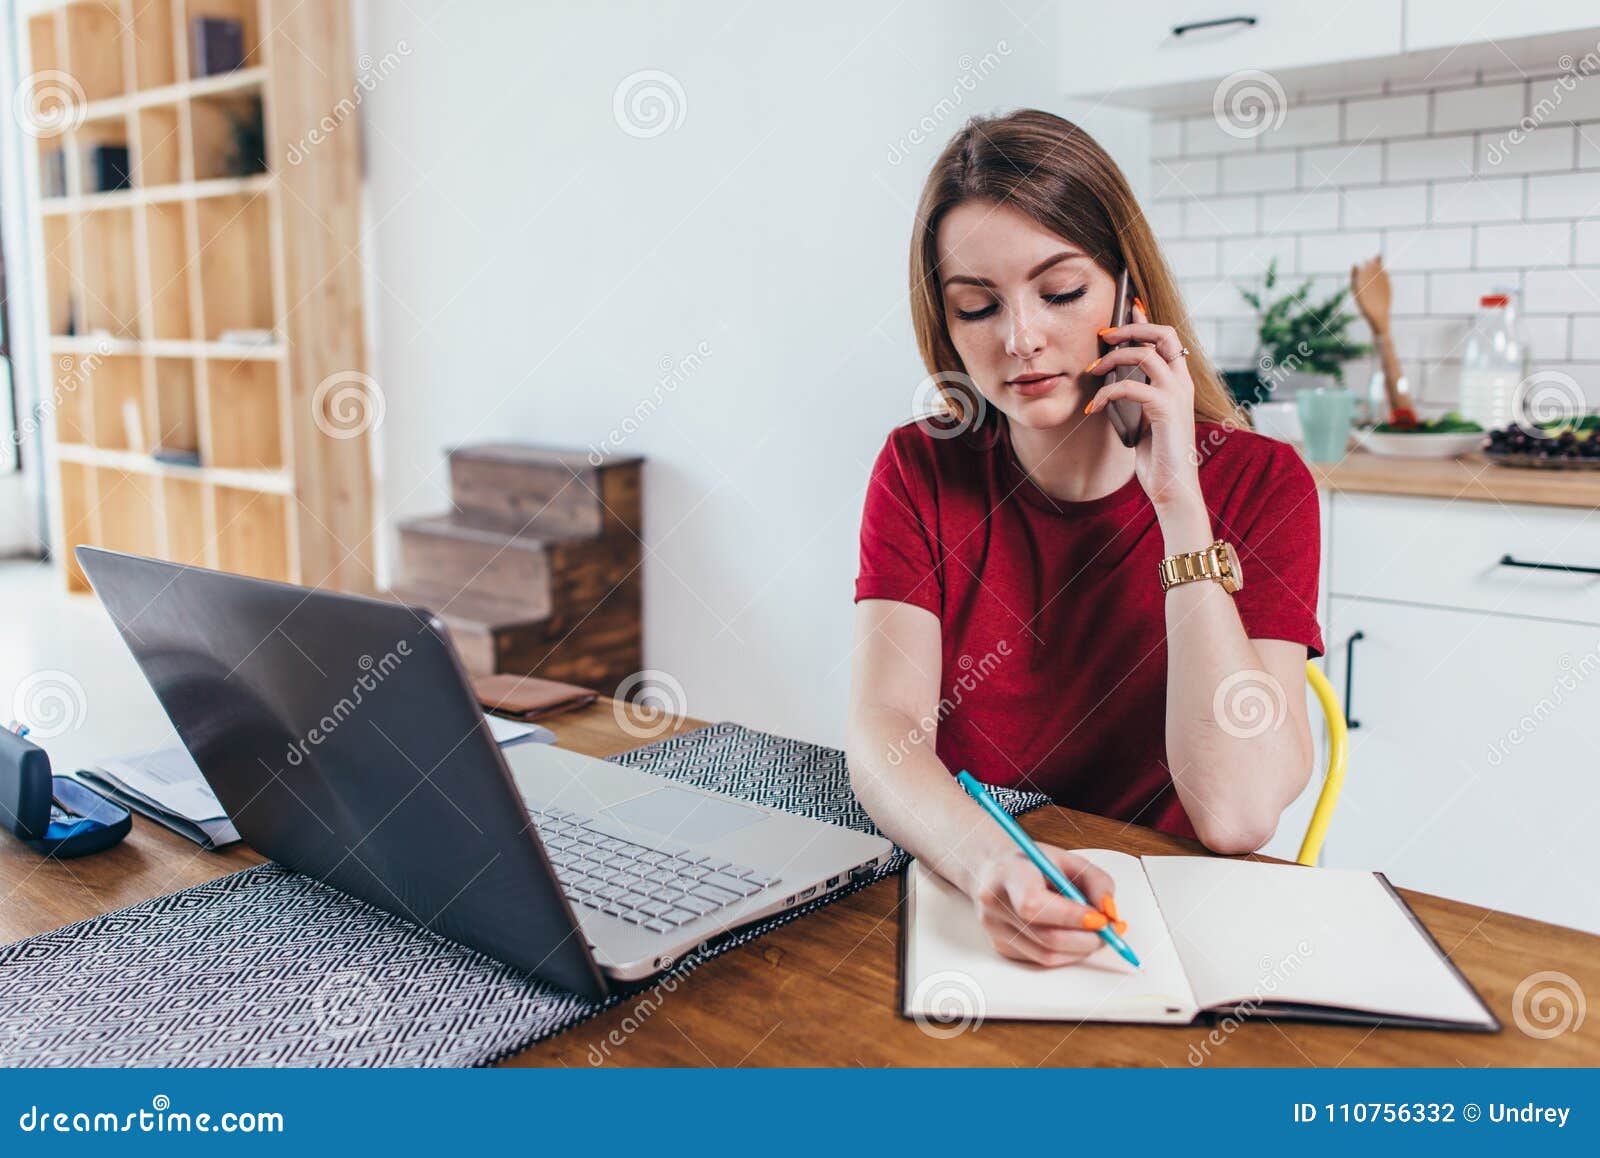 woman working at home write notes while talking on phone